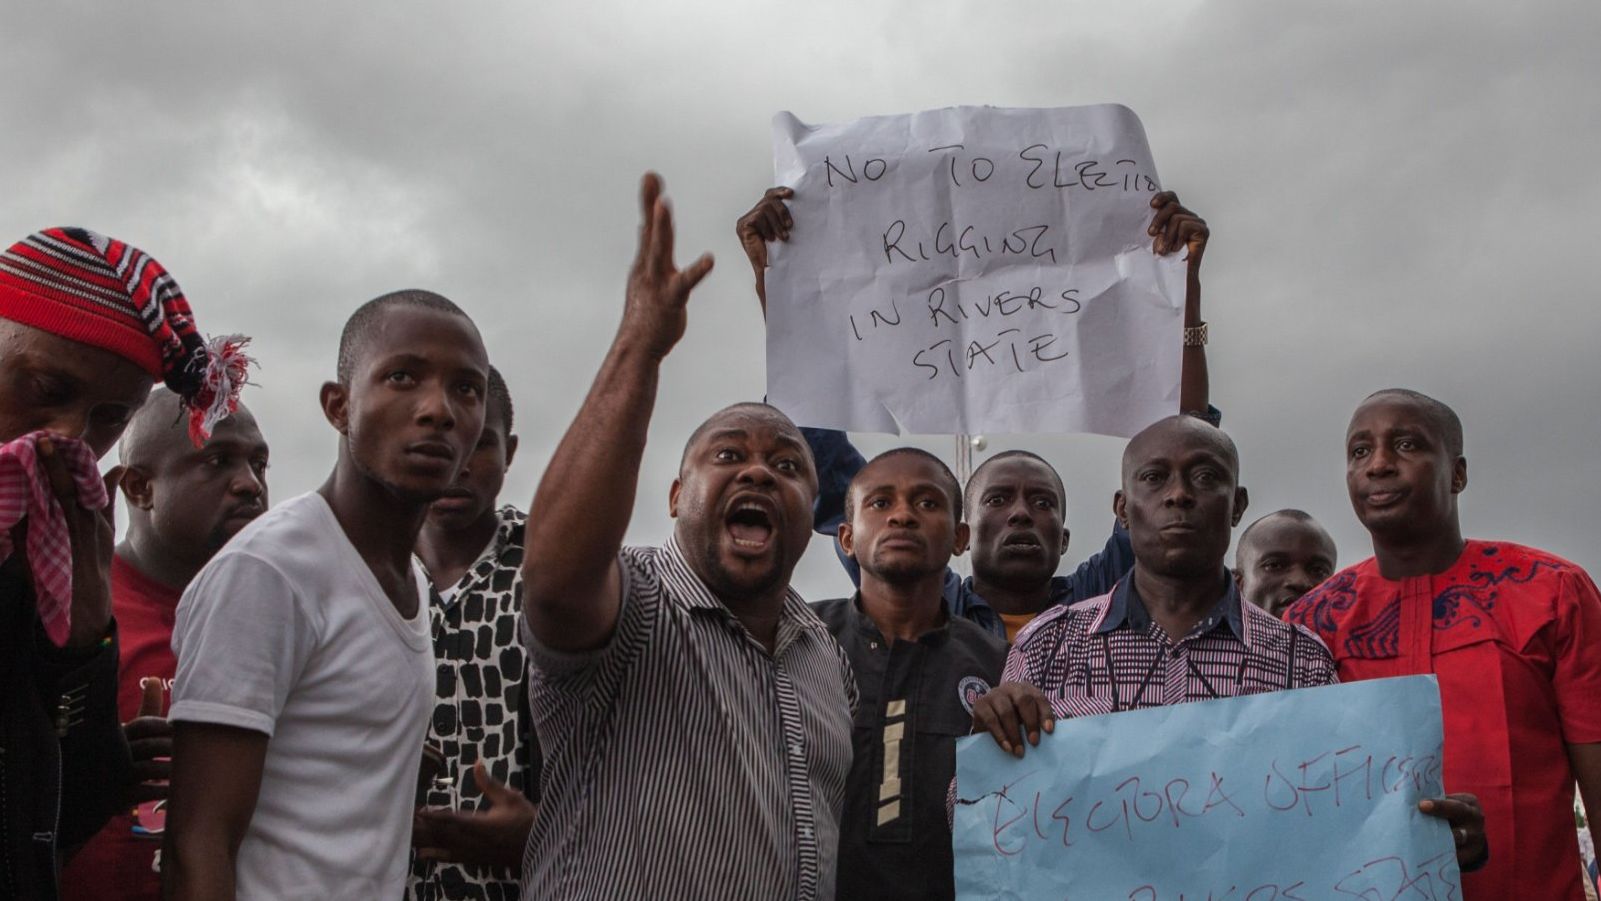 After protests in Rivers state, Buhari's All Progressives Congress demanded the elections there be canceled.